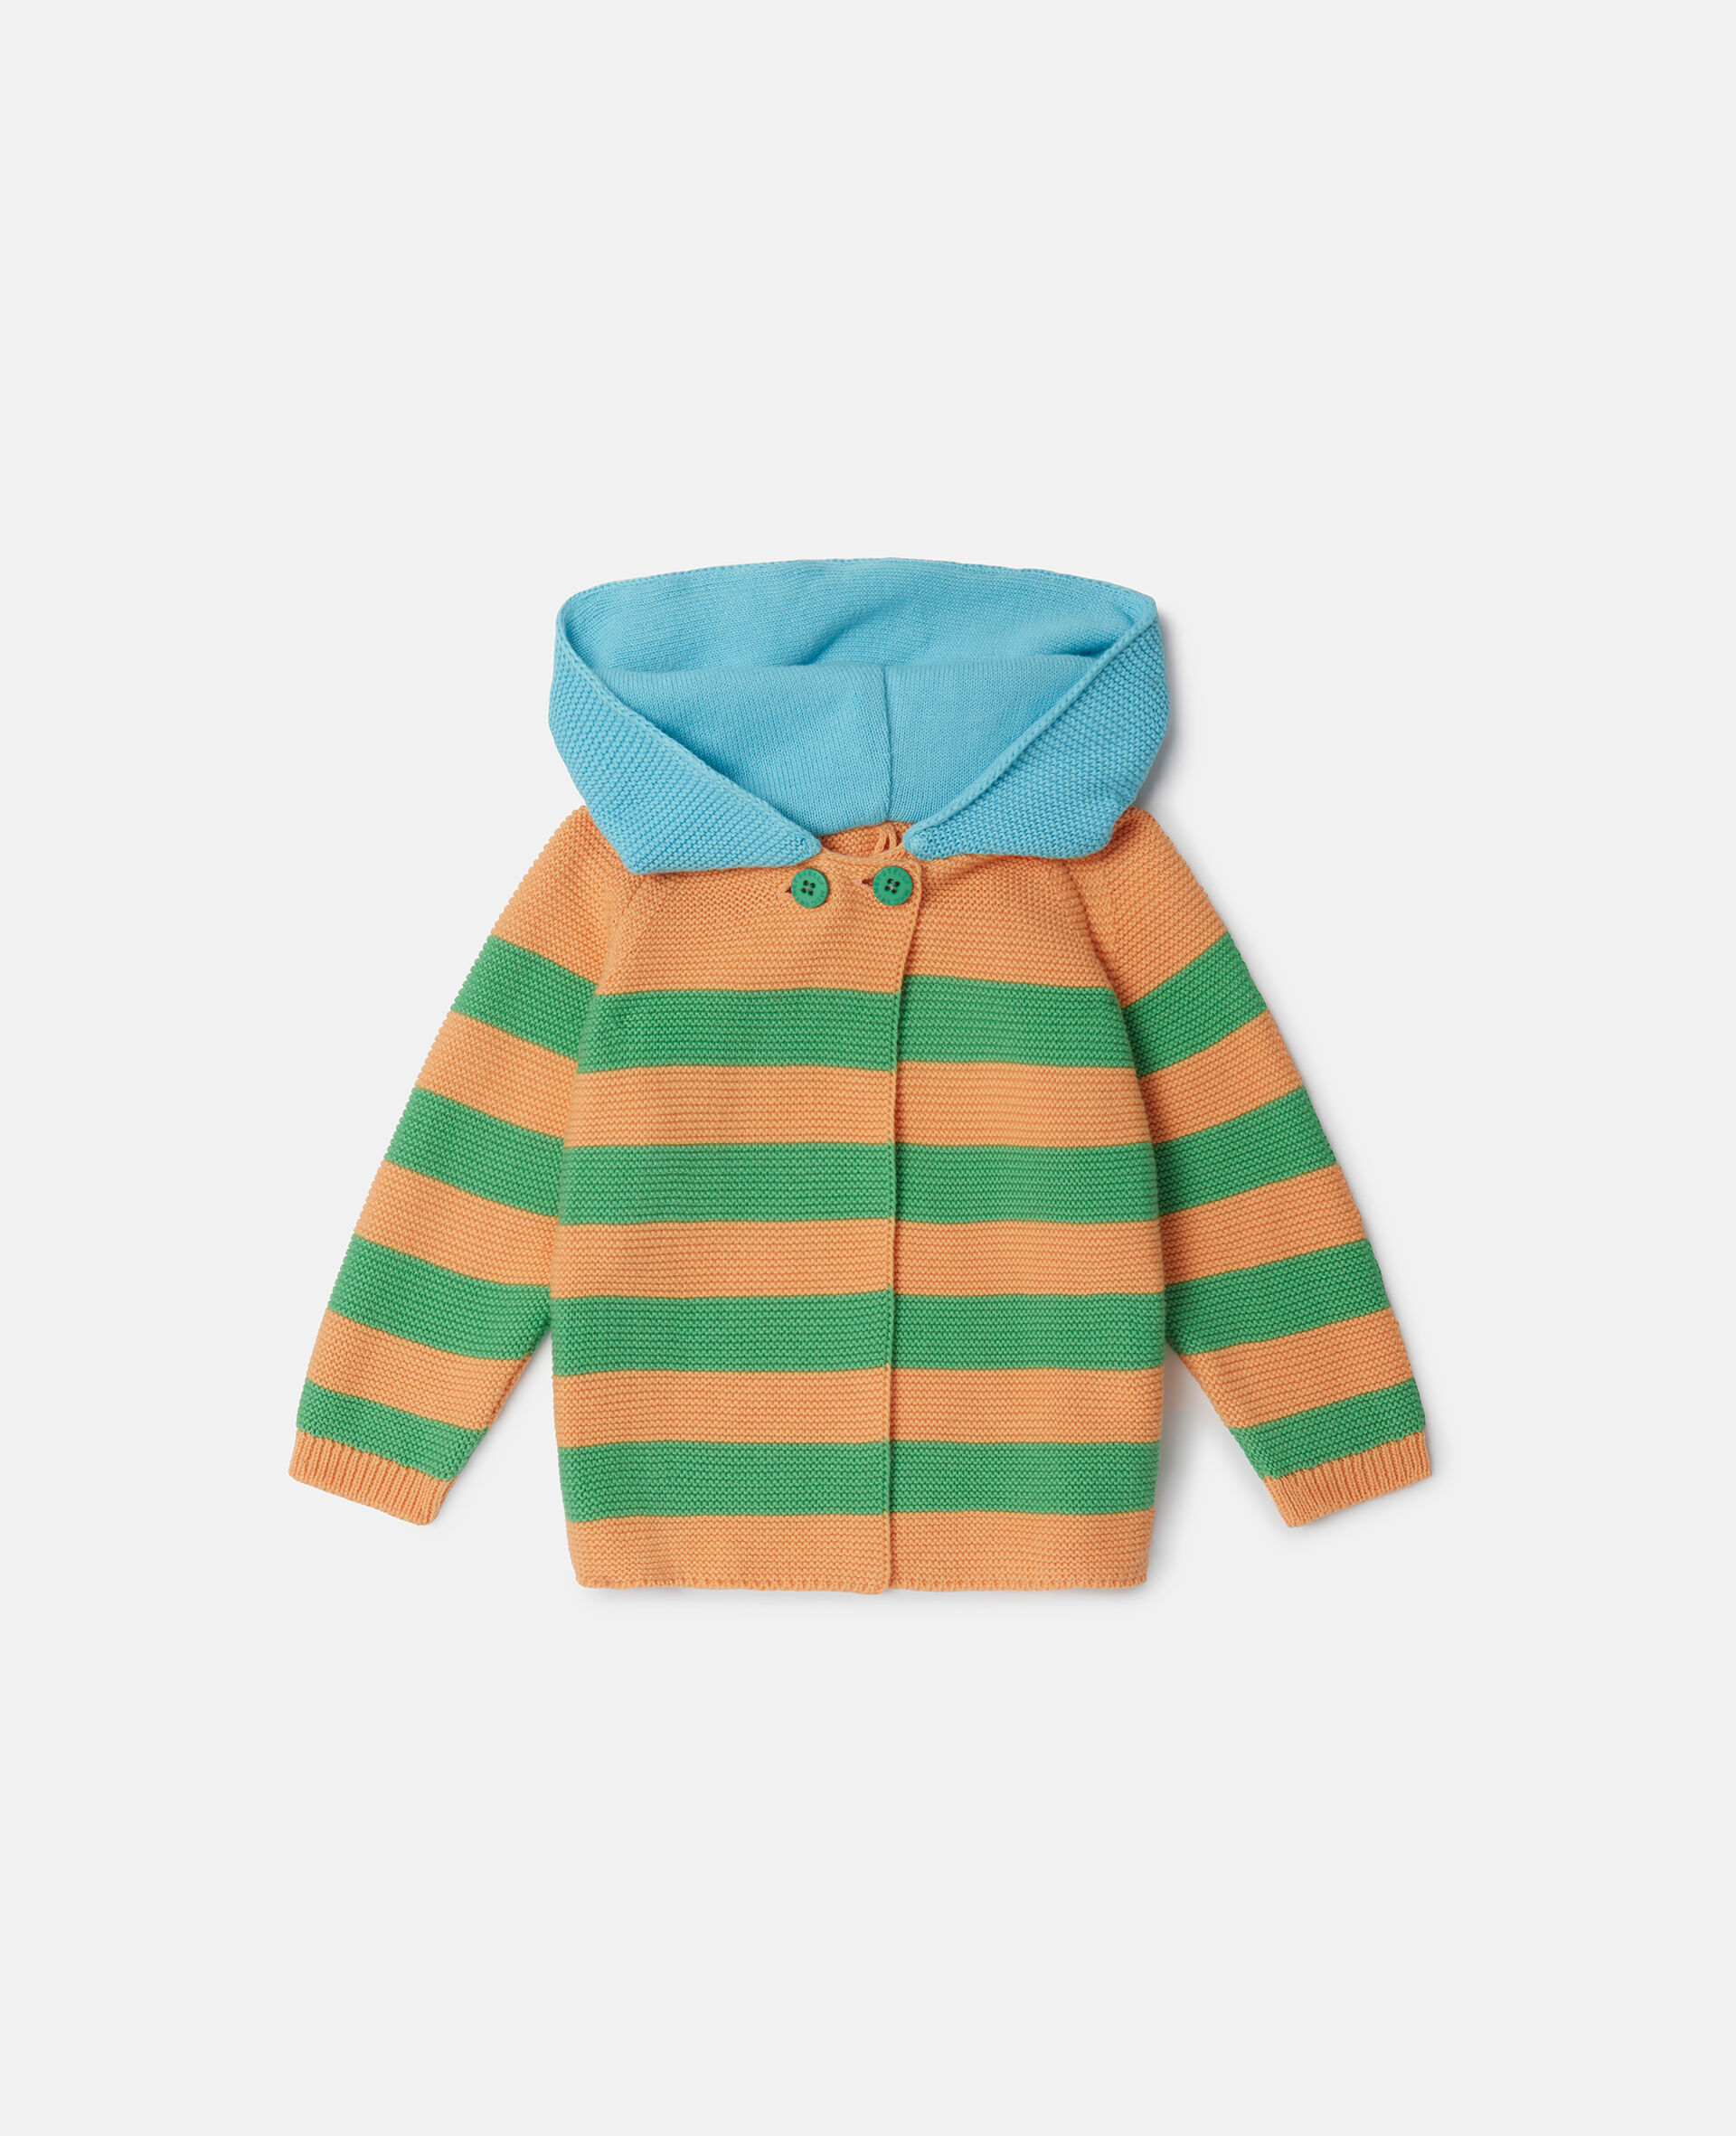 Striped Bumblebee Hooded Cardigan-Multicolored-large image number 0